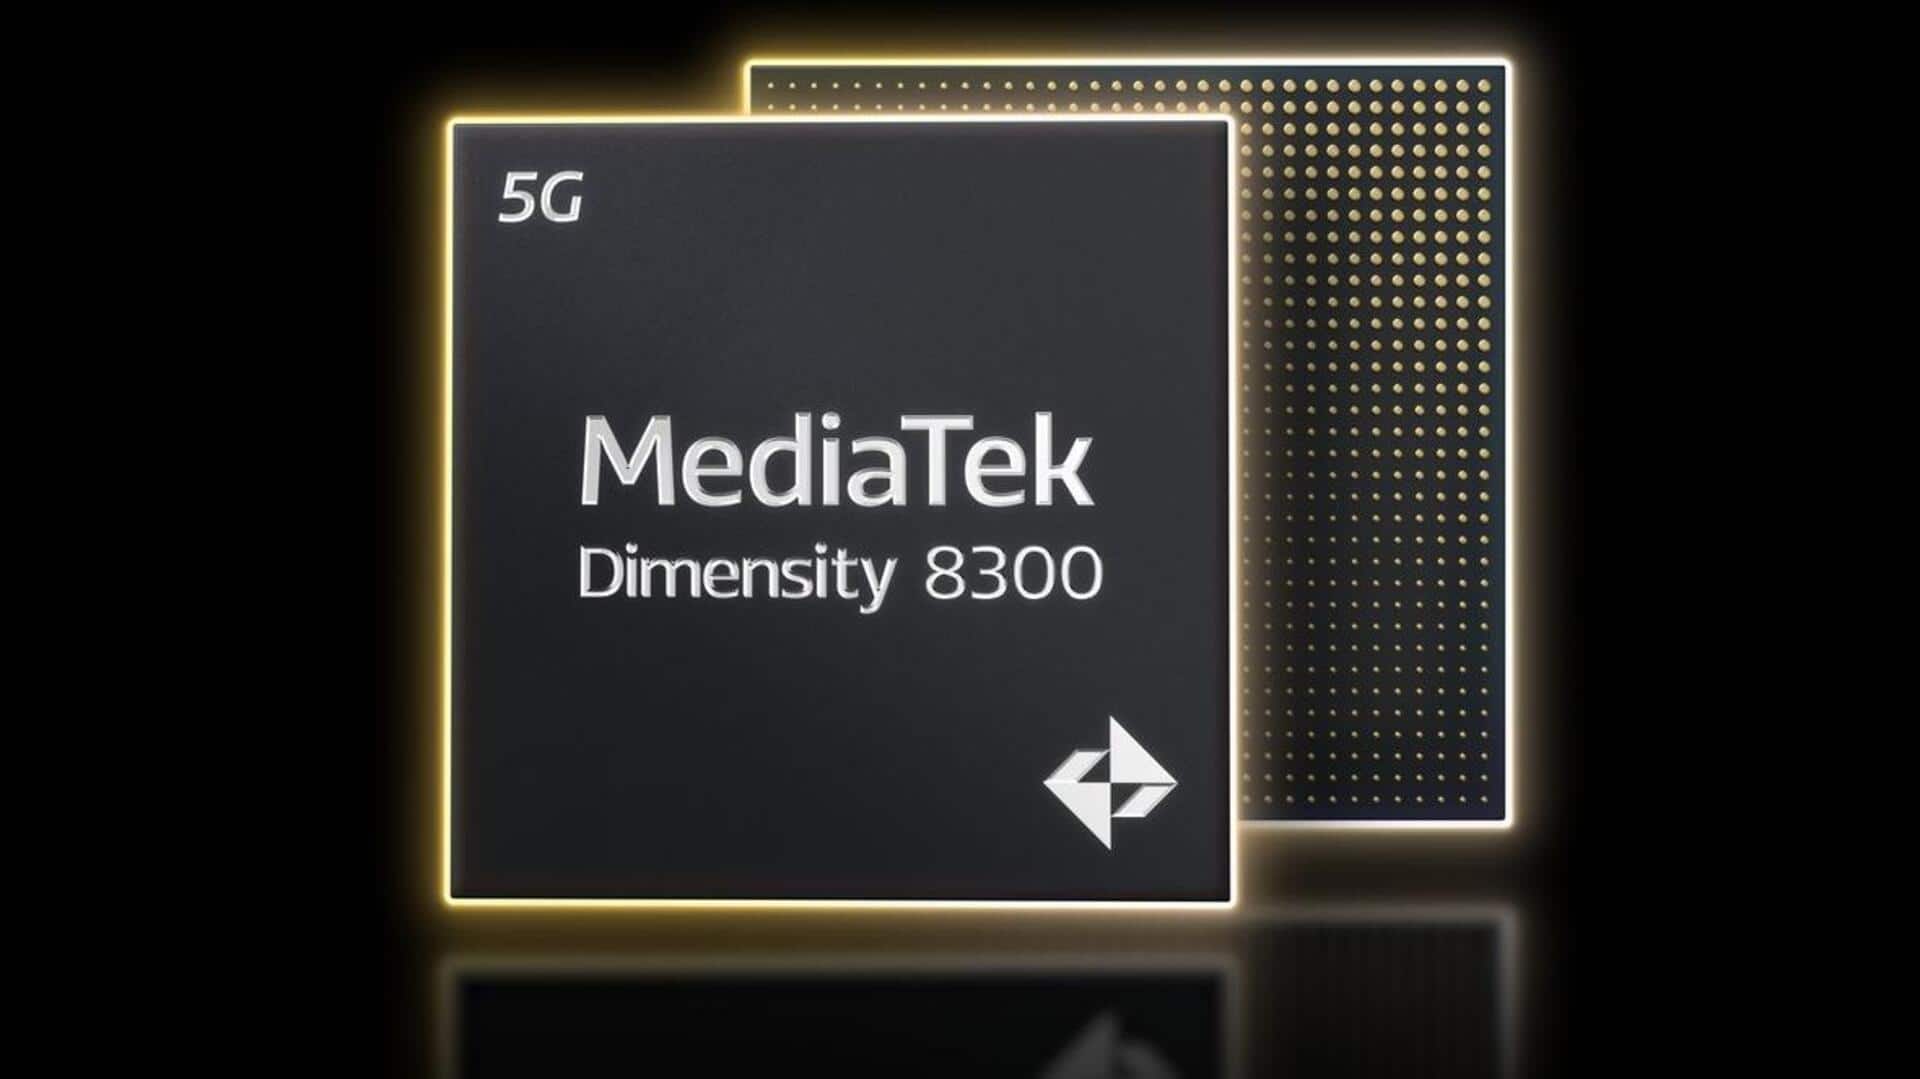 MediaTek Dimensity 8300 chipset announced with on-device generative AI capabilities